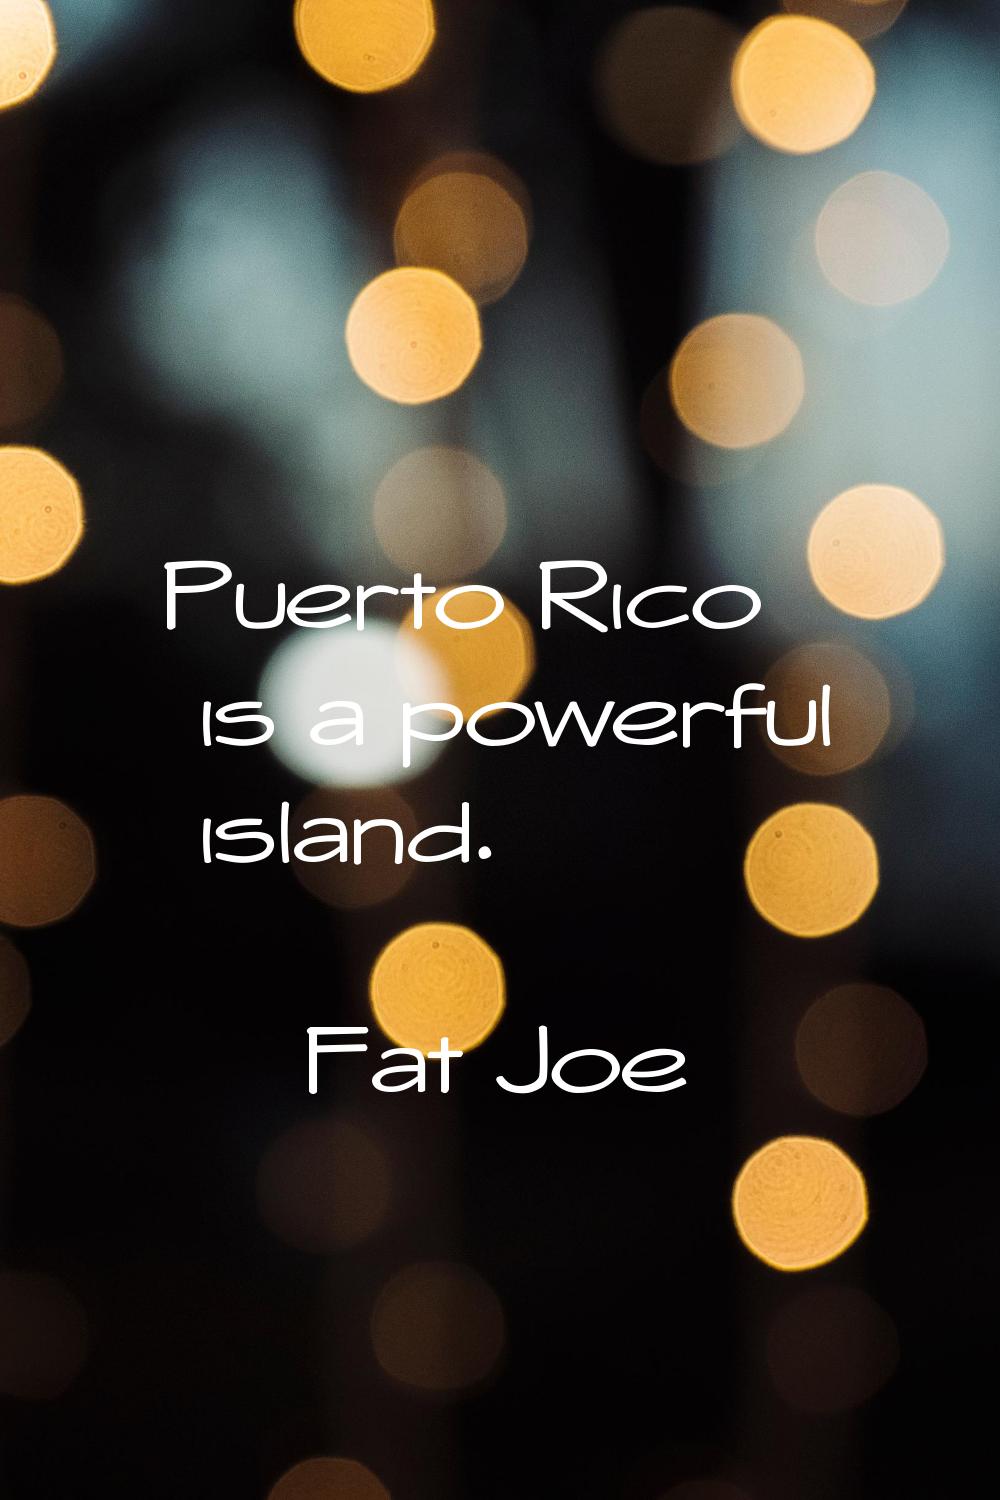 Puerto Rico is a powerful island.